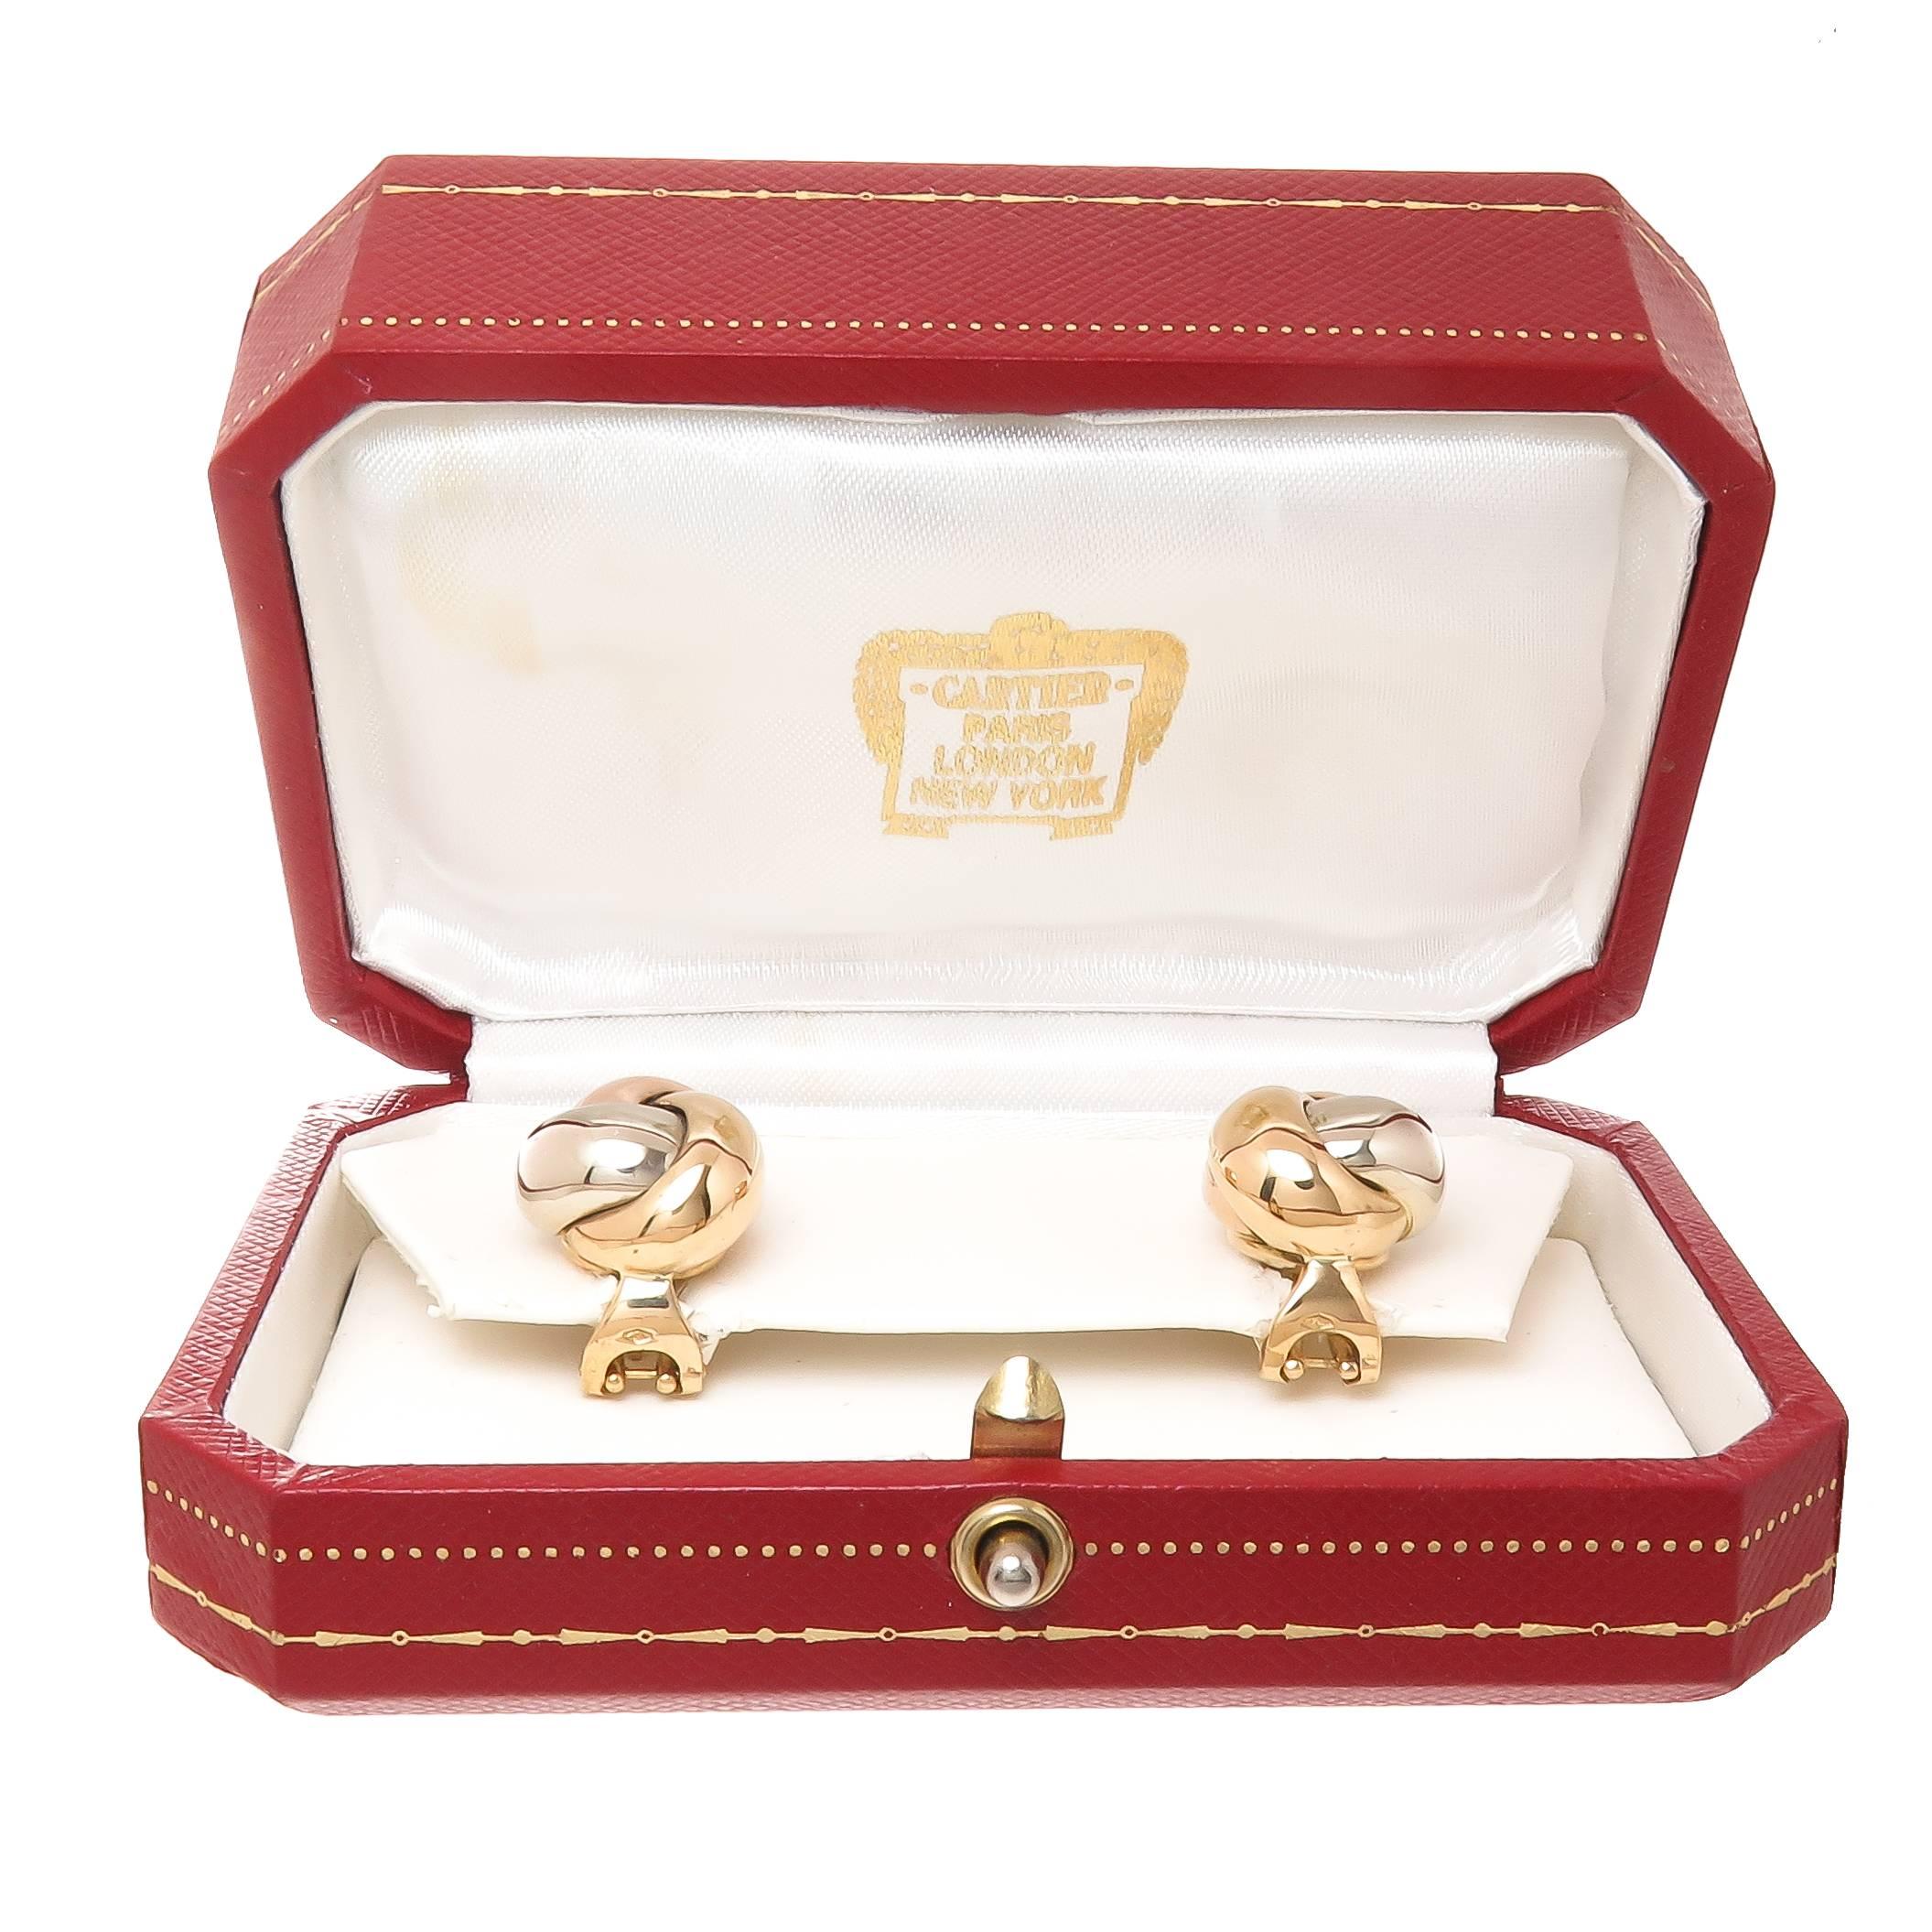 Circa 2005 Cartier Trinity Collection 18K Yellow, Pink and white Gold Tri Color Knot Earrings, measuring 5/8 inch in Diameter and 1/2 inch thick. Having Omega clip backs with a Post. Comes in Original Cartier Presentation Box. 